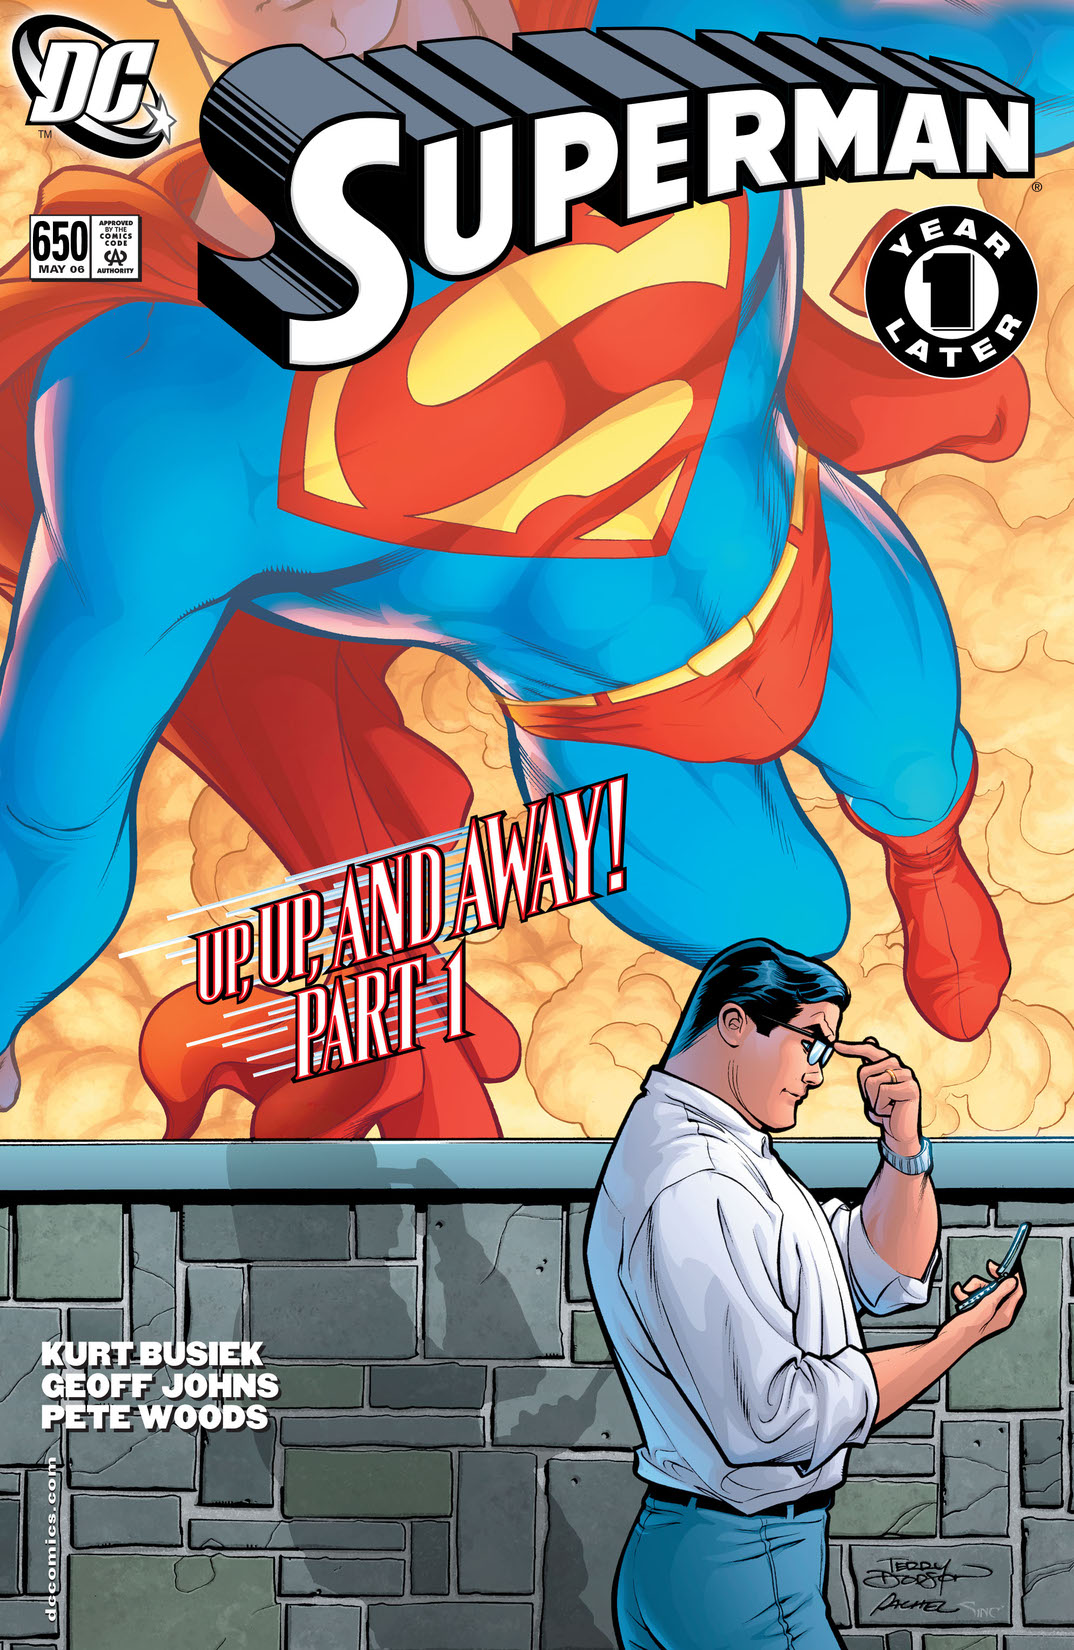 Superman (2006-) #650 preview images